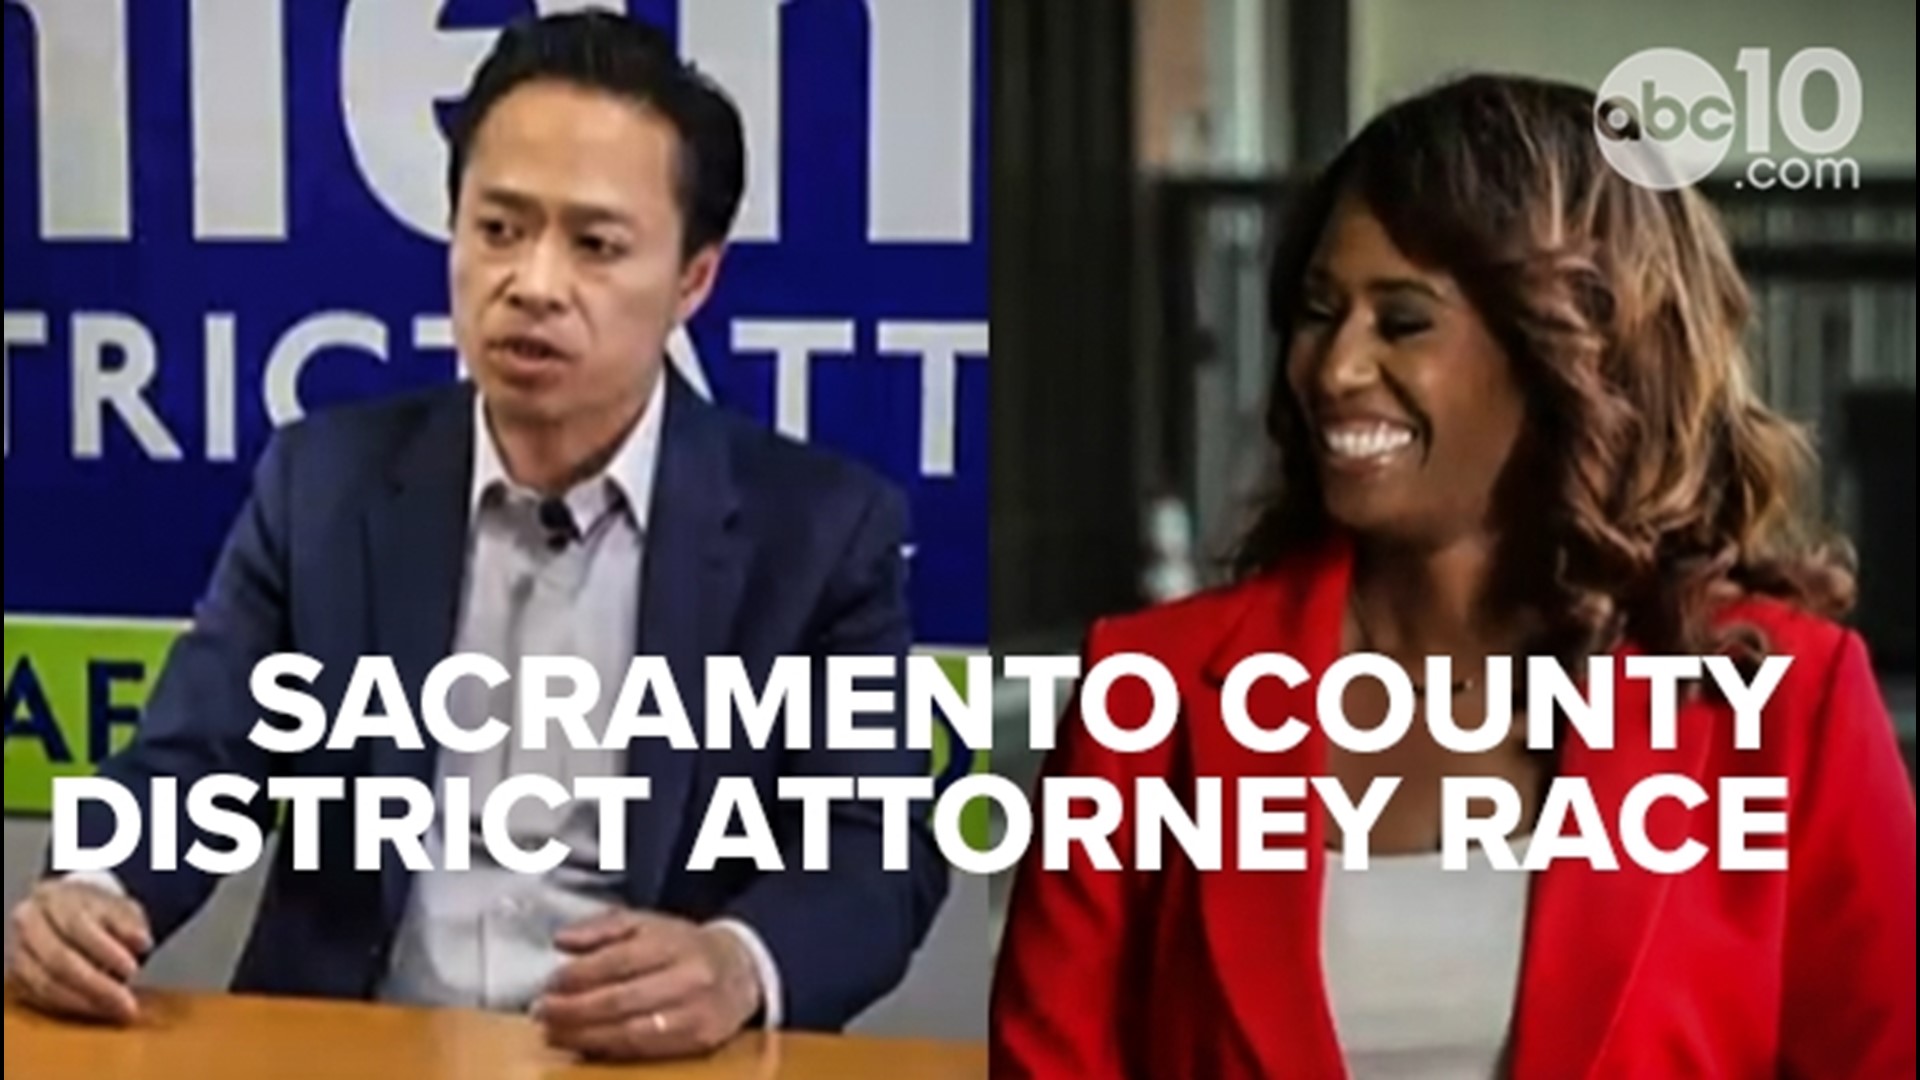 In a Sacramento 2022 midterm election, former deputy district attorney Alana Mathews and current deputy district attorney Thien Ho are facing off.